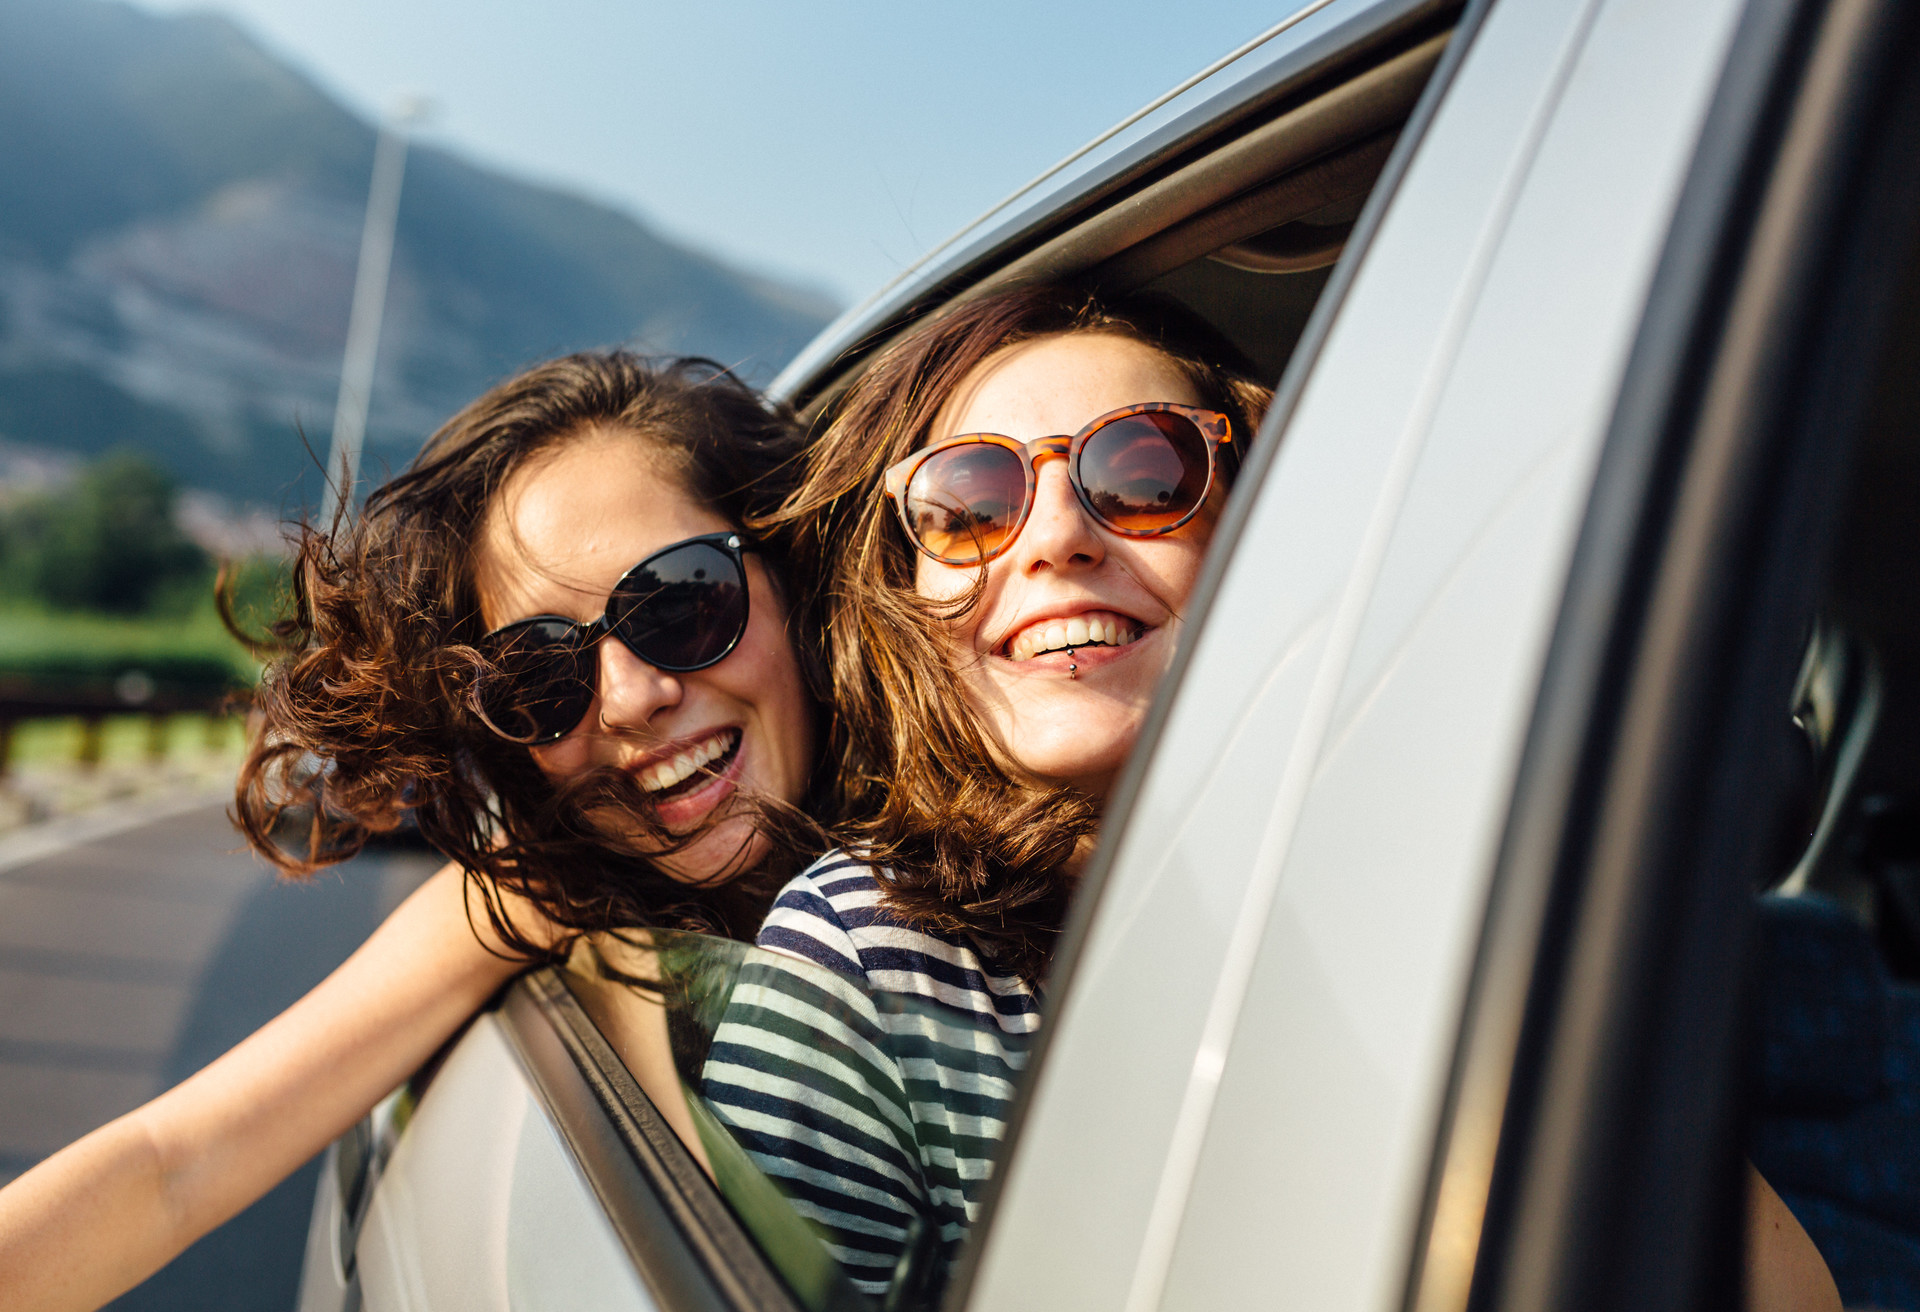 The minimum age for hiring a car can vary from country to country according to local regulations. Find out whether you meet the age requirements.